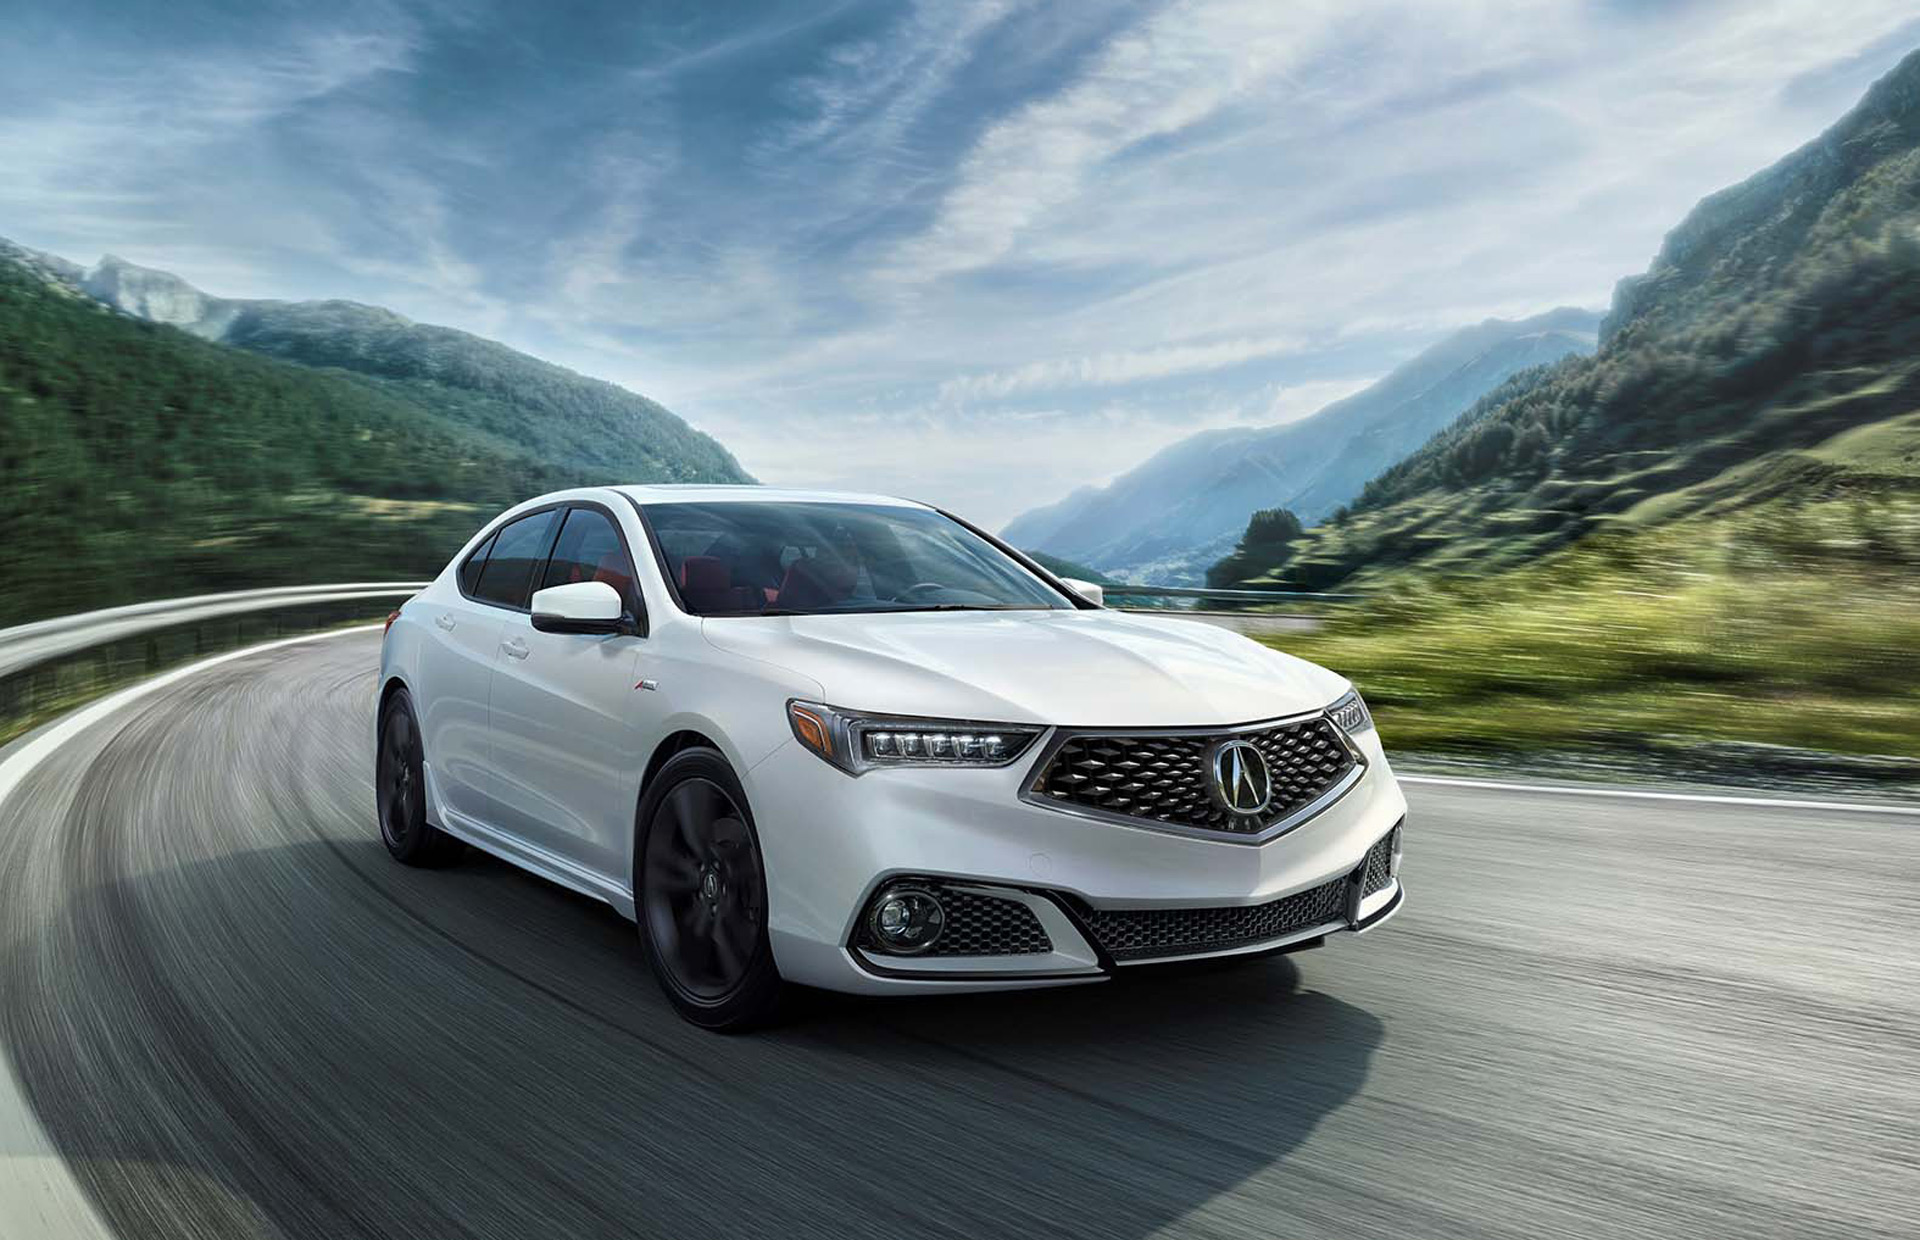 2018 Acura TLX video preview